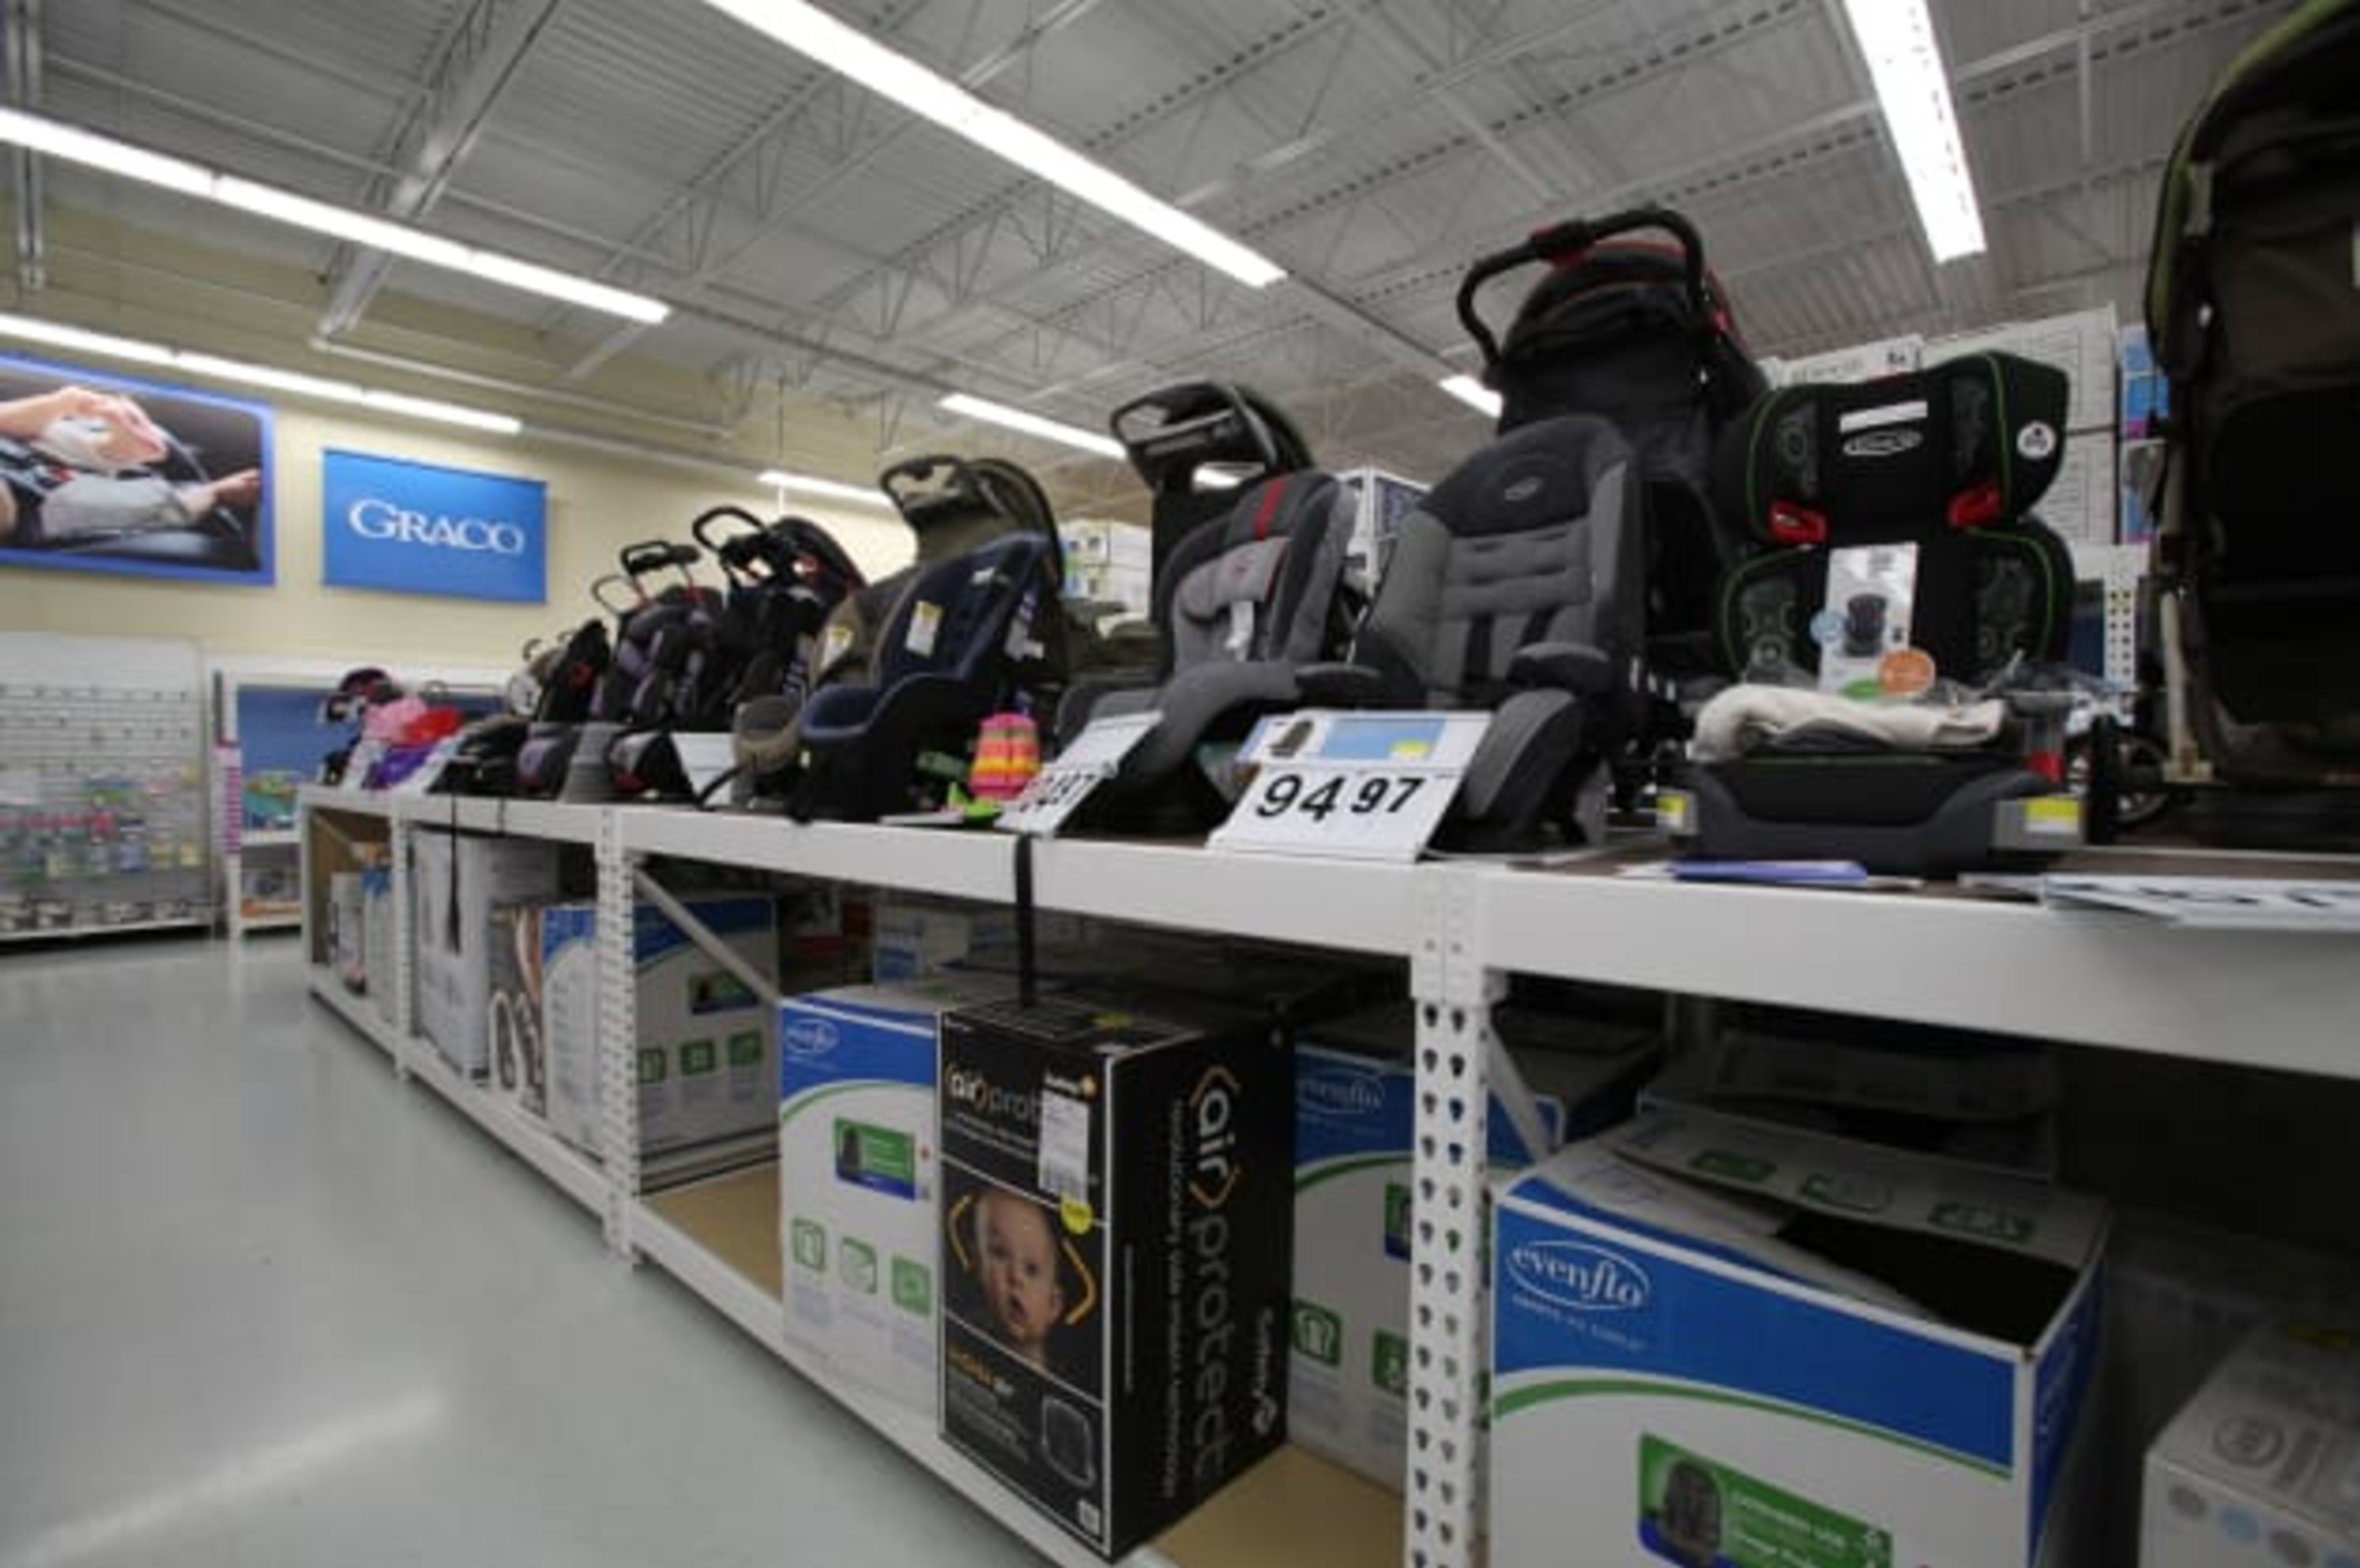 Graco car seats for sale in Walmart supercentre in Kitchener Ontario Canada 2011